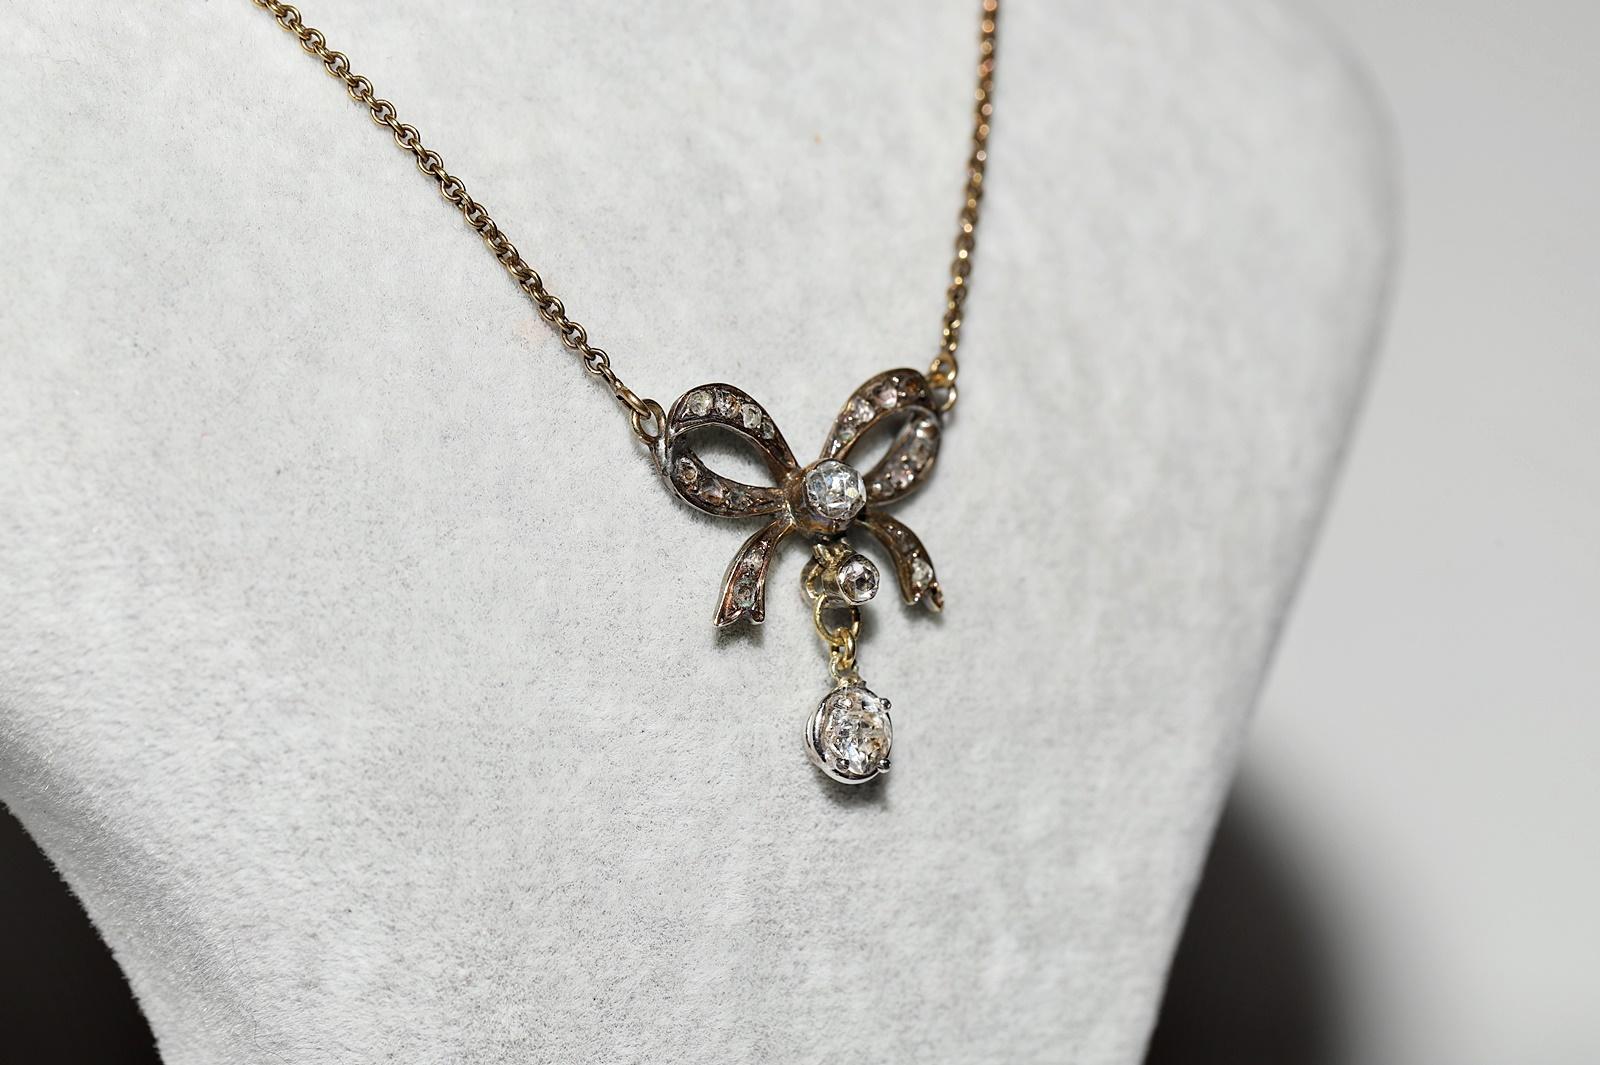 Antique Circa 1900s 14k Gold Natural Diamond Decorated Pretty Necklace In Good Condition For Sale In Fatih/İstanbul, 34